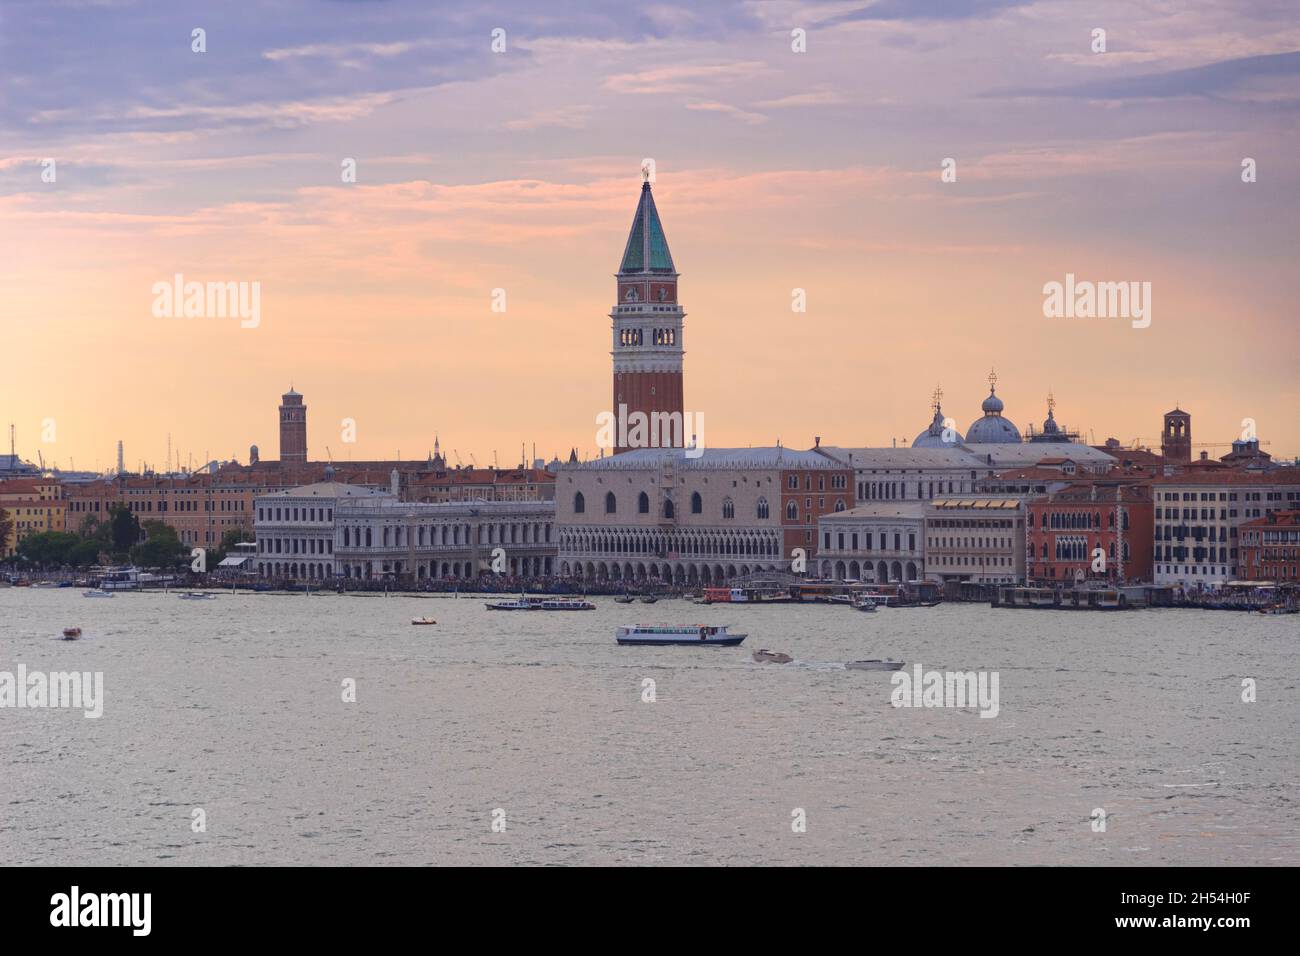 Venice landmark, aerial view of Piazza San Marco or st Mark square, Campanile and Palazzo Ducale or Doge Palace. Italy, Europe. Stock Photo